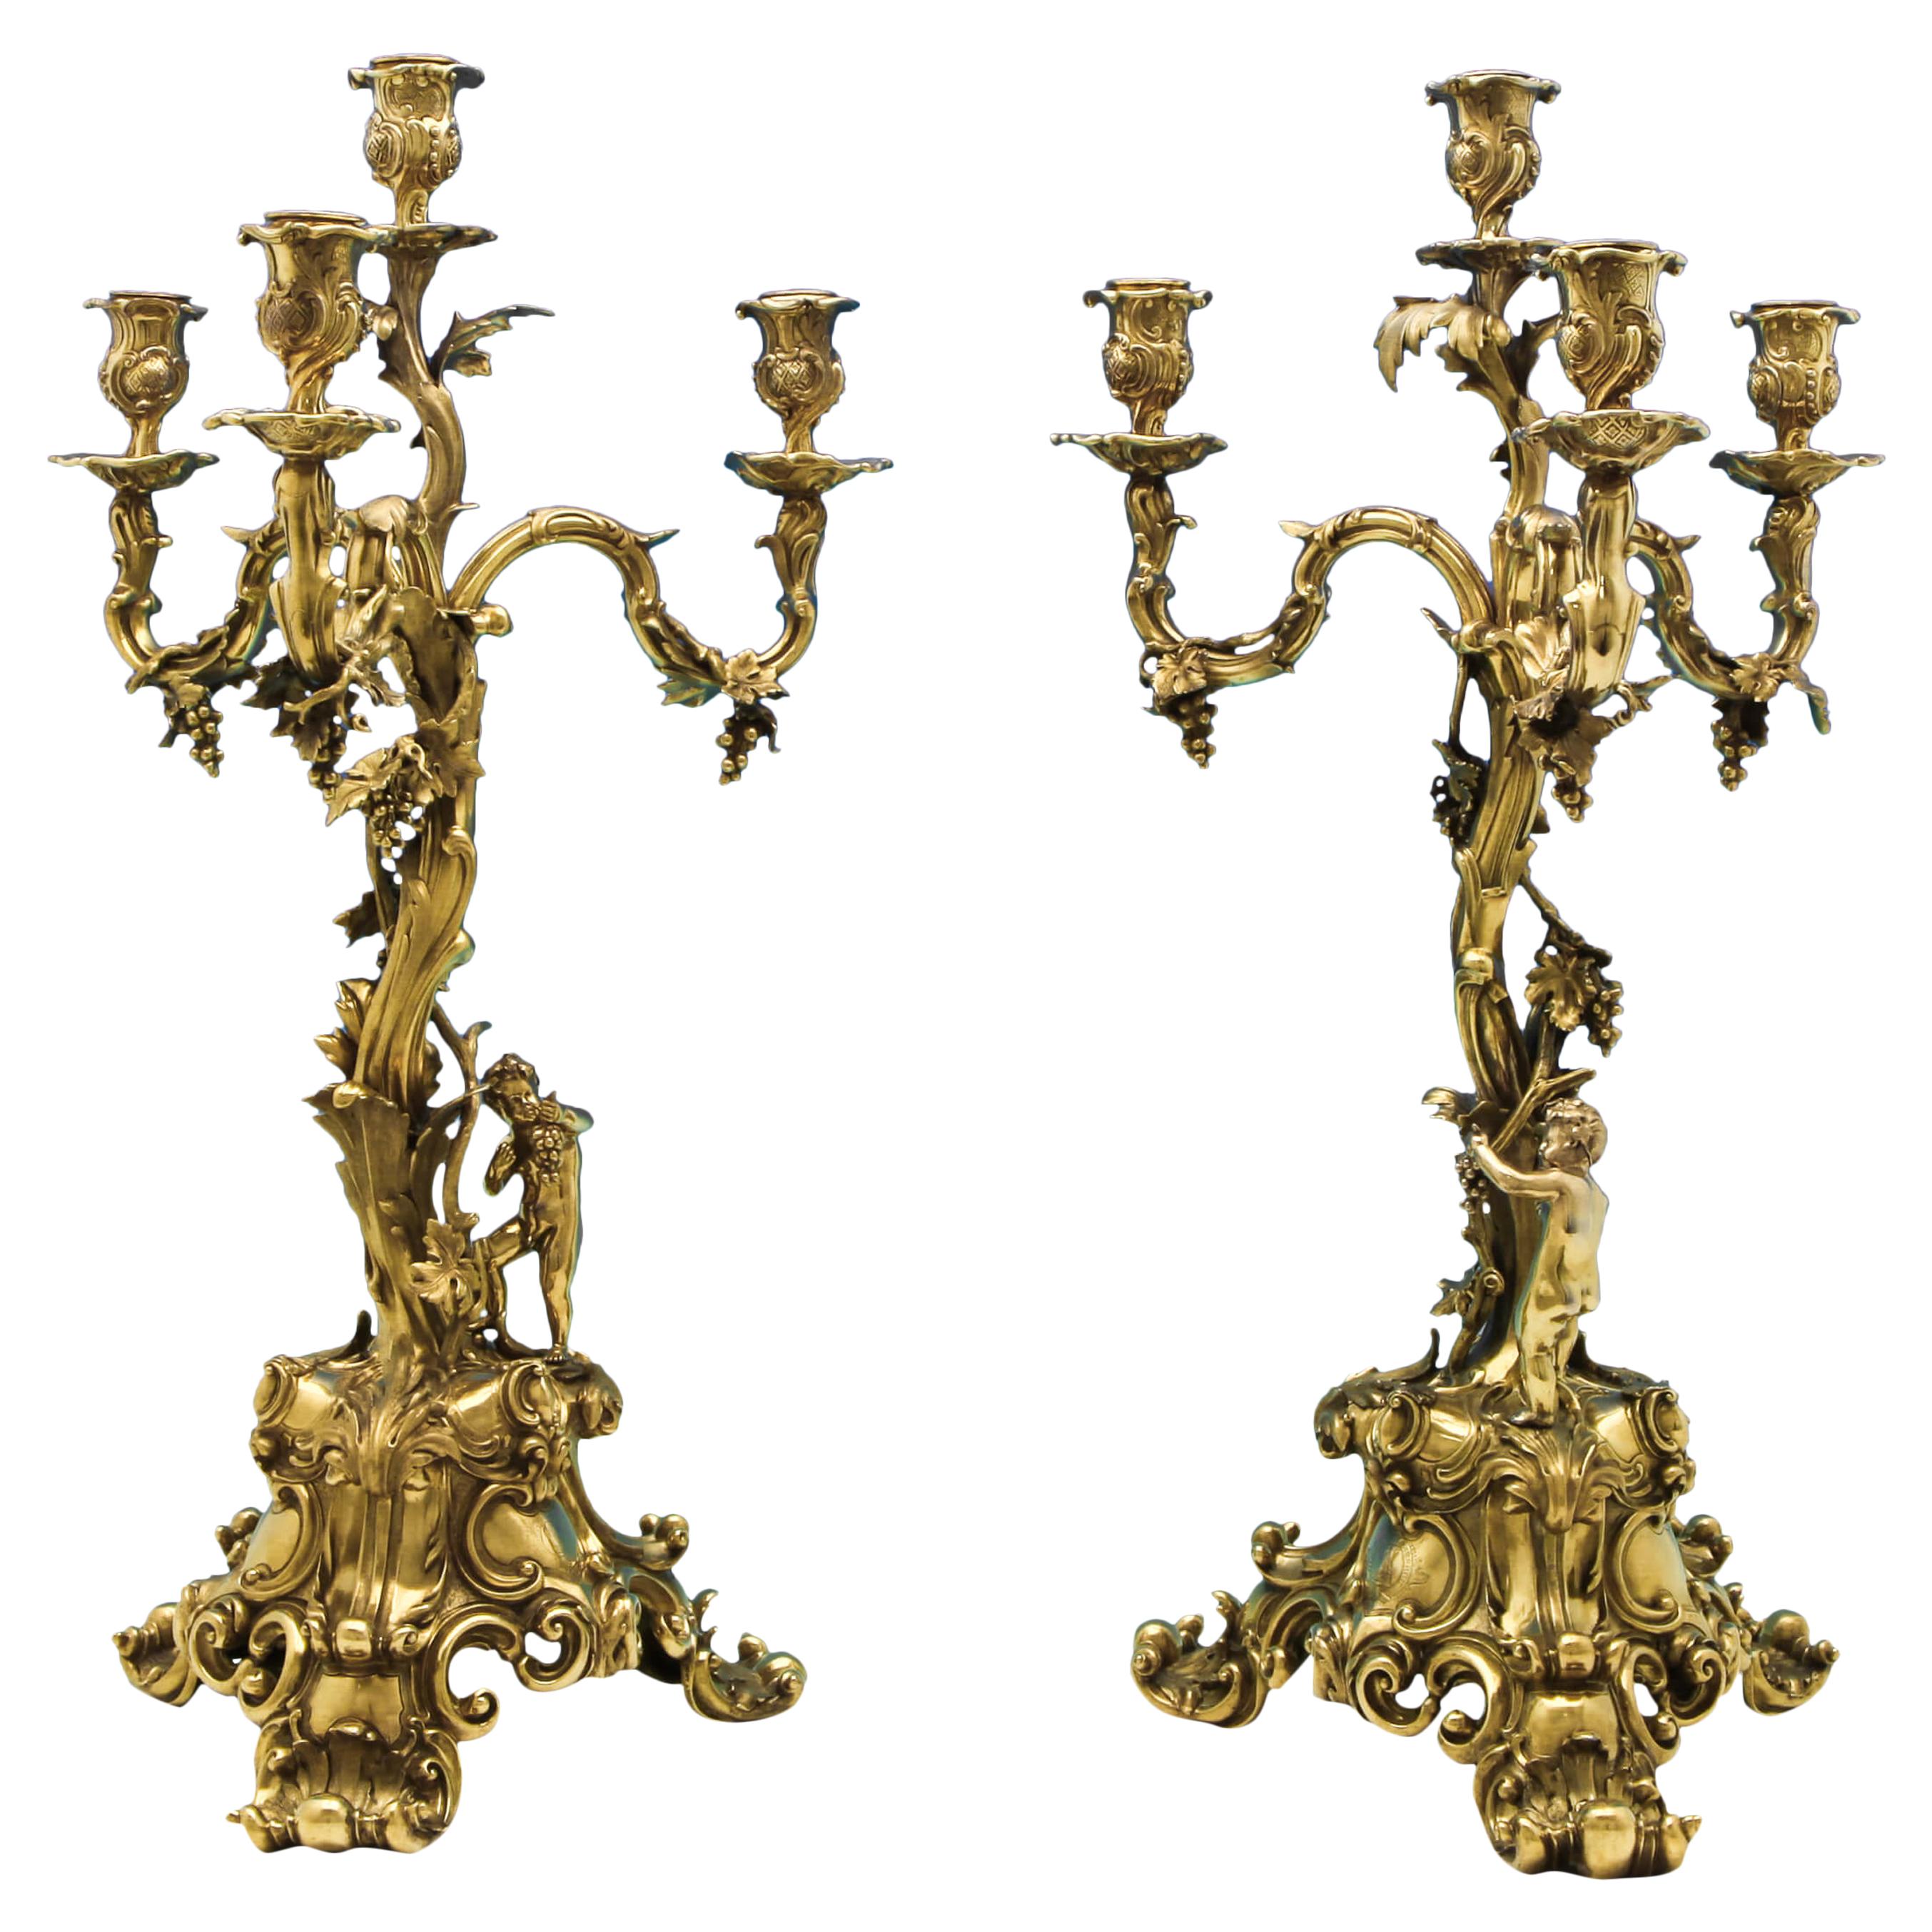 Rococo Revival Wine Related Gilt Antique Sterling Silver Pair of Candelabra